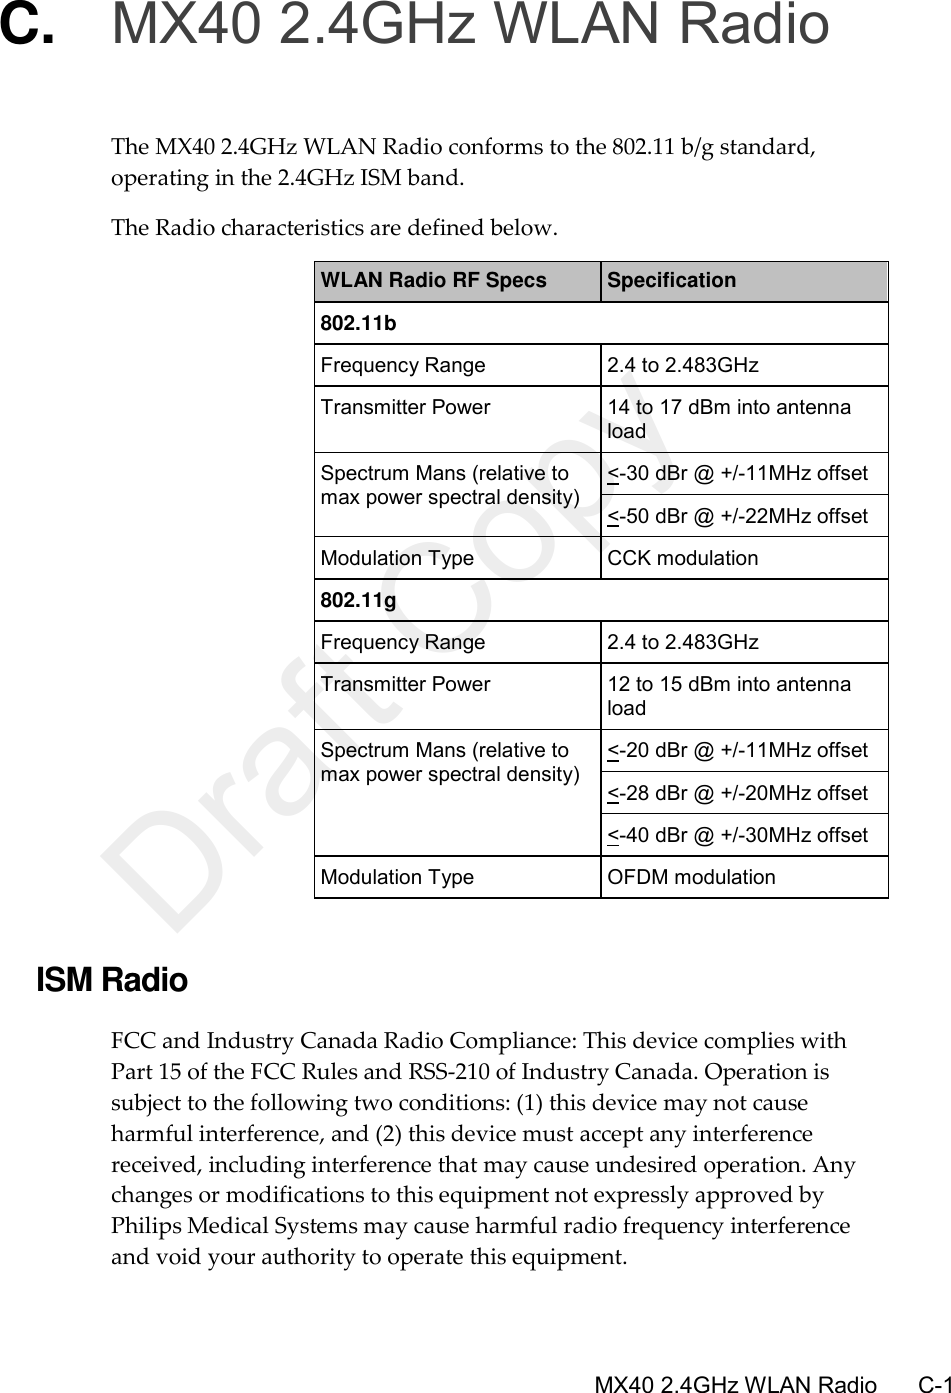      MX40 2.4GHz WLAN Radio       C-1 C. MX40 2.4GHz WLAN Radio The MX40 2.4GHz WLAN Radio conforms to the 802.11 b/g standard, operating in the 2.4GHz ISM band. The Radio characteristics are defined below. WLAN Radio RF Specs Specification 802.11b Frequency Range 2.4 to 2.483GHz Transmitter Power 14 to 17 dBm into antenna load Spectrum Mans (relative to max power spectral density) &lt;-30 dBr @ +/-11MHz offset &lt;-50 dBr @ +/-22MHz offset Modulation Type CCK modulation 802.11g Frequency Range 2.4 to 2.483GHz Transmitter Power 12 to 15 dBm into antenna load Spectrum Mans (relative to max power spectral density)  &lt;-20 dBr @ +/-11MHz offset &lt;-28 dBr @ +/-20MHz offset &lt;-40 dBr @ +/-30MHz offset Modulation Type OFDM modulation  ISM Radio FCC and Industry Canada Radio Compliance: This device complies with Part 15 of the FCC Rules and RSS-210 of Industry Canada. Operation is subject to the following two conditions: (1) this device may not cause harmful interference, and (2) this device must accept any interference received, including interference that may cause undesired operation. Any changes or modifications to this equipment not expressly approved by Philips Medical Systems may cause harmful radio frequency interference and void your authority to operate this equipment.  Draft Copy